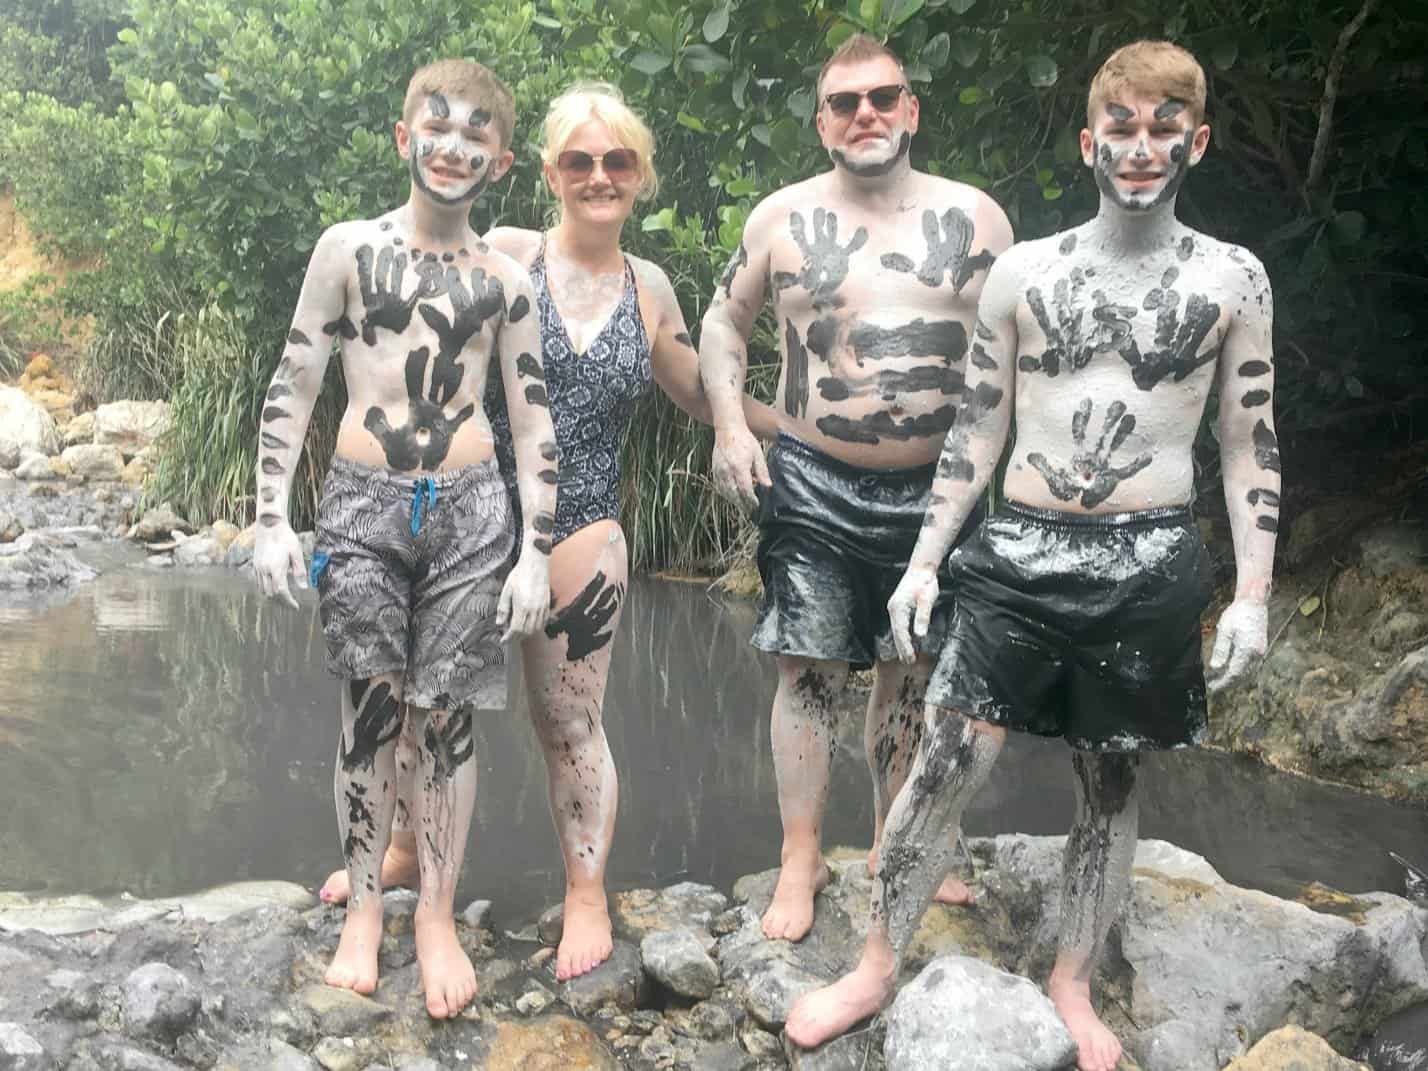 Mud Bath in the Volcano at St Lucia www.extraordinarychaos.com